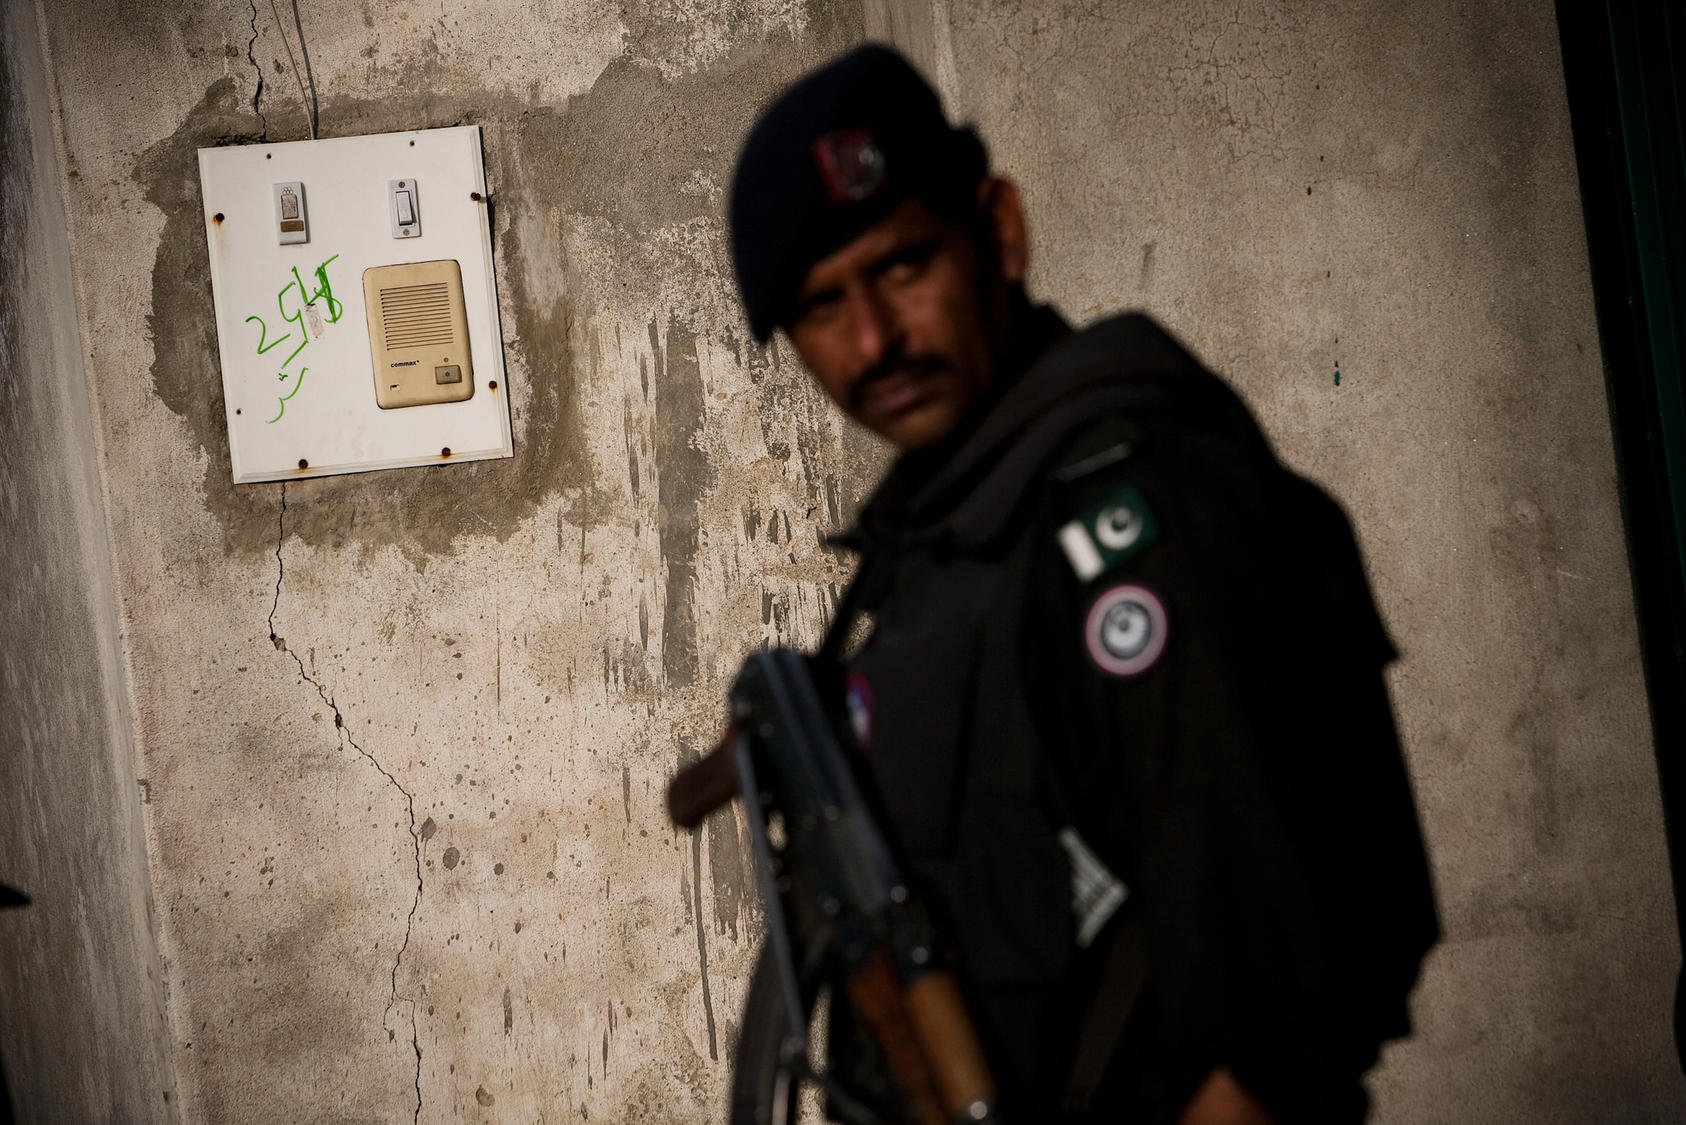 A Pakistani policeman stands next to the intercom at the entrance to the compound where Osama Bin Laden was killed in Abbottabad, Pakistan.